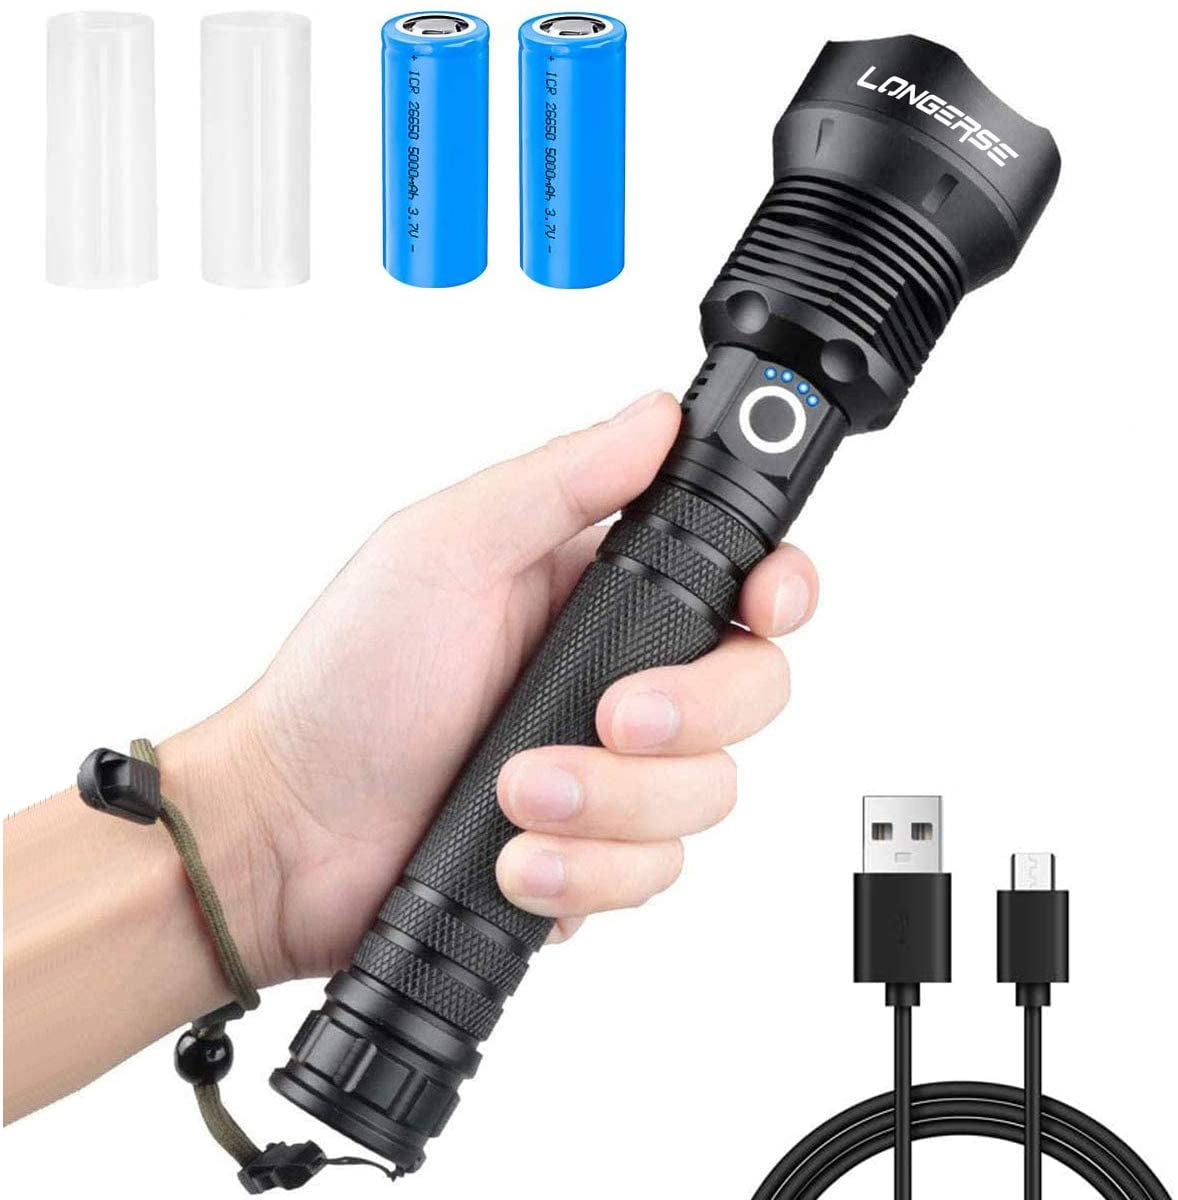 New Super Bright 50000LM T6 LED Flashlight Rechargeable Zoom Torch 18650 3 Modes 